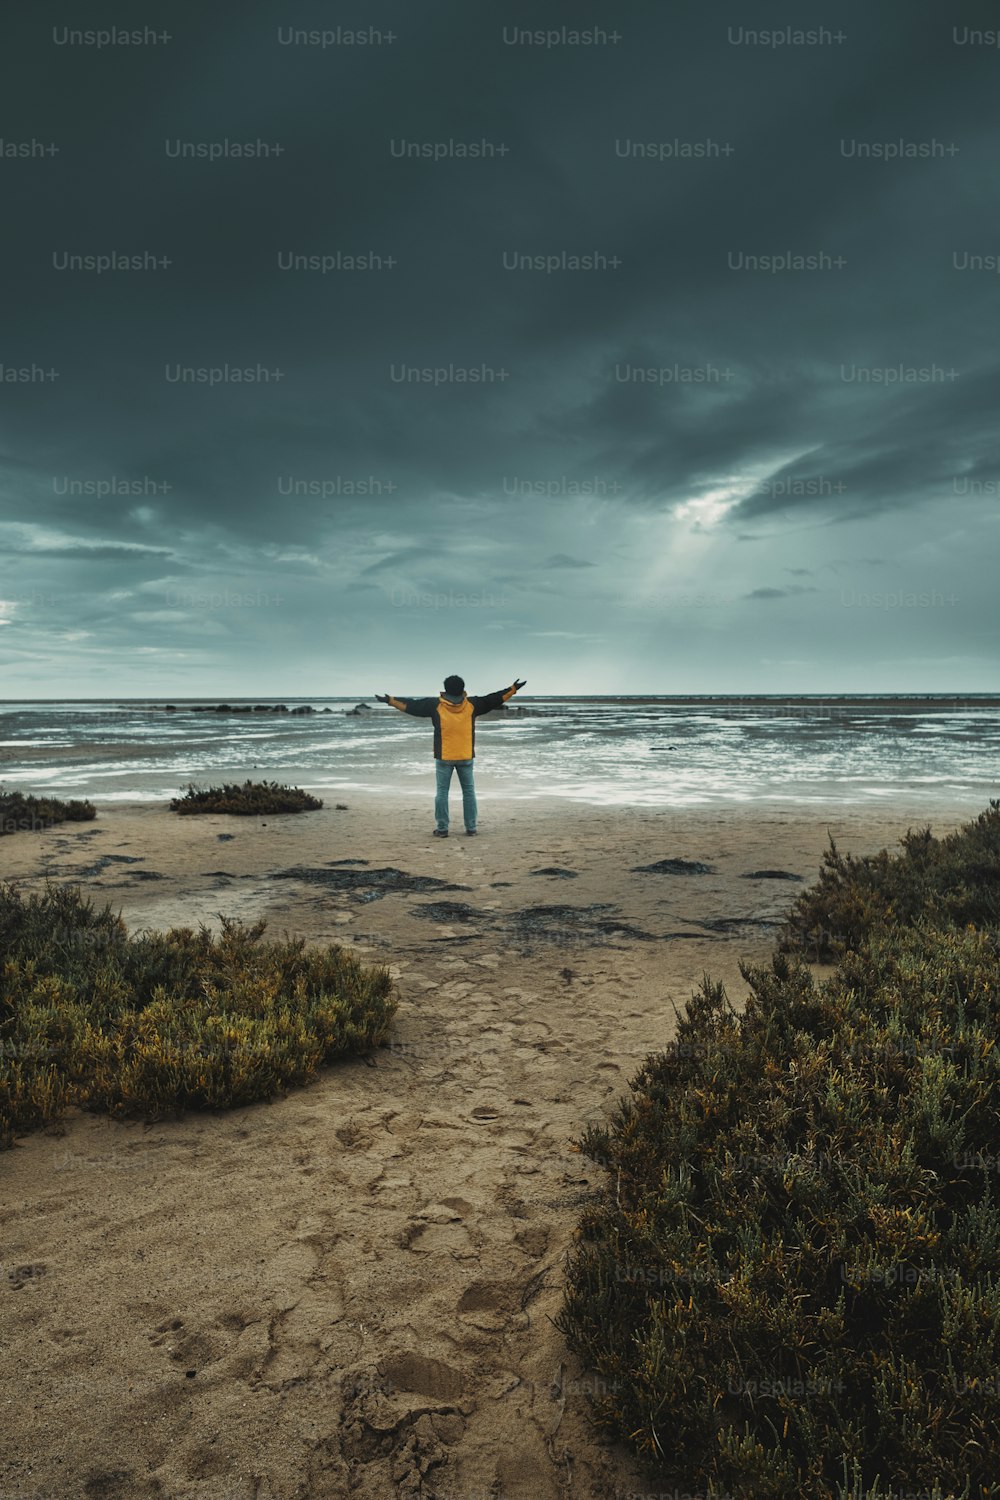 Concept of climate change for global warming people. Man standing against bad weather with black and blue clouds and flood water ground. Adventure people at the beach and epic landscape